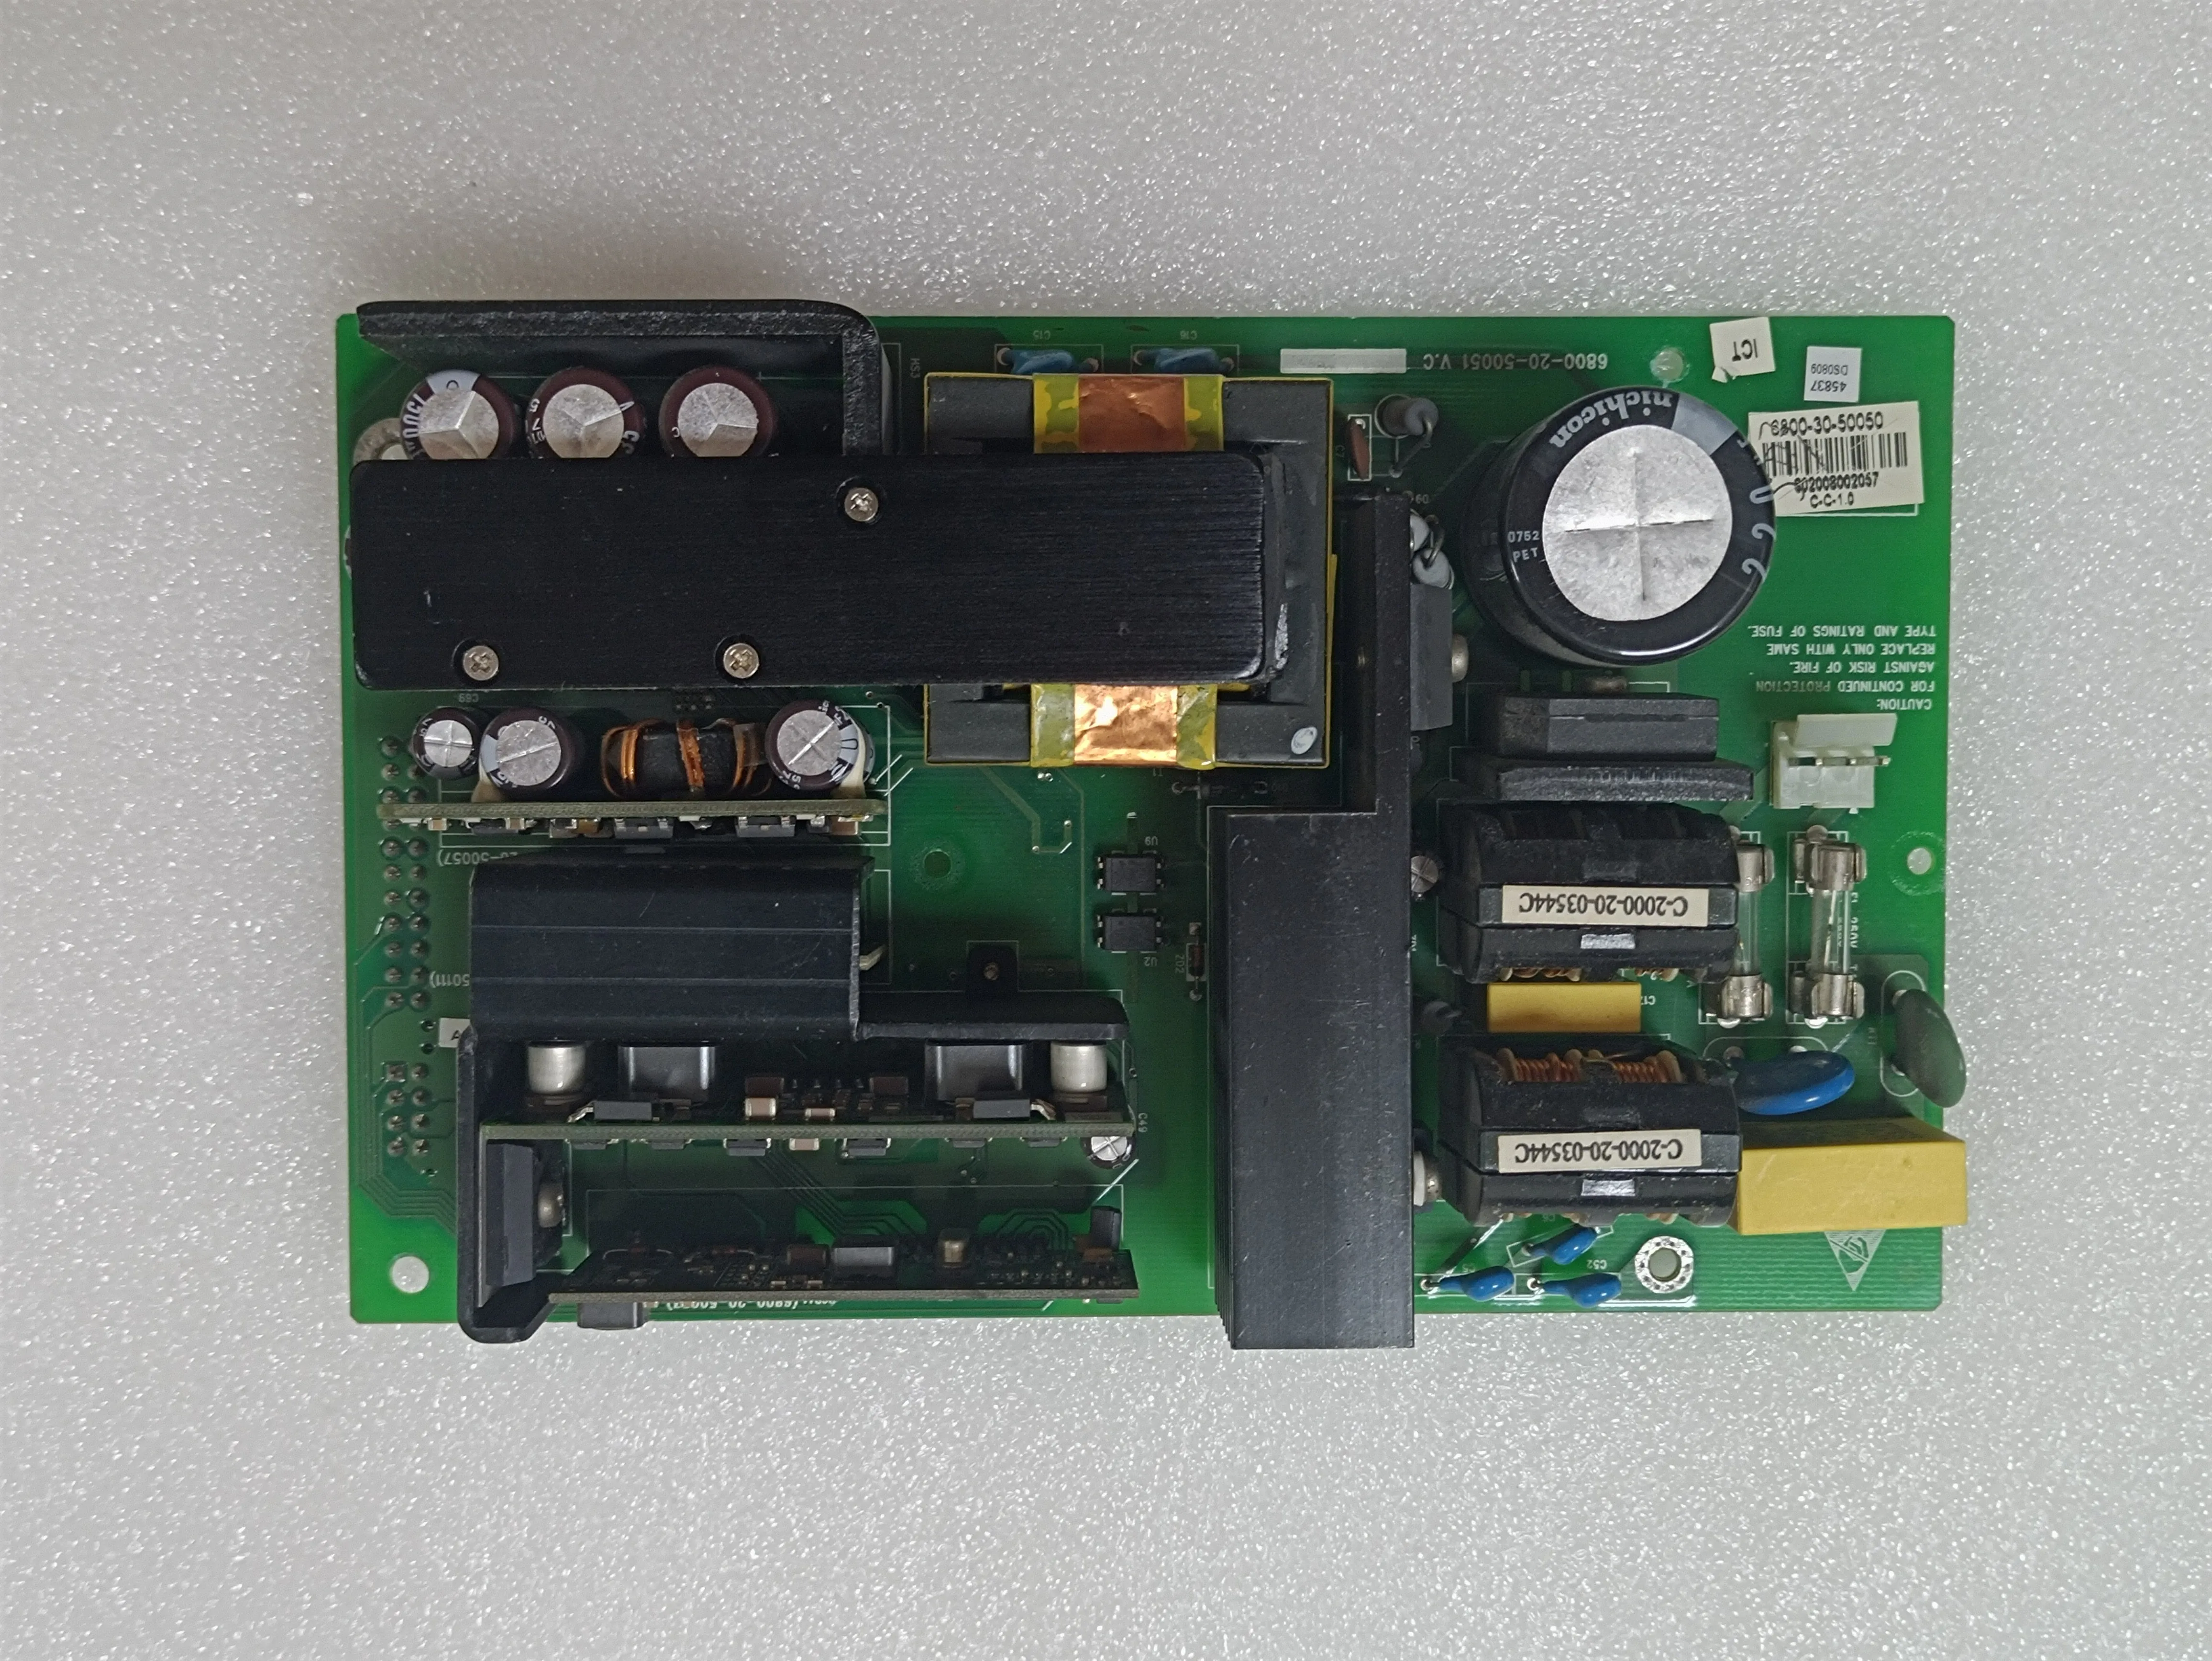 

Power Supply Board For Mindray Beneview T8, Part No : 05100019300 Used, Original, Tested